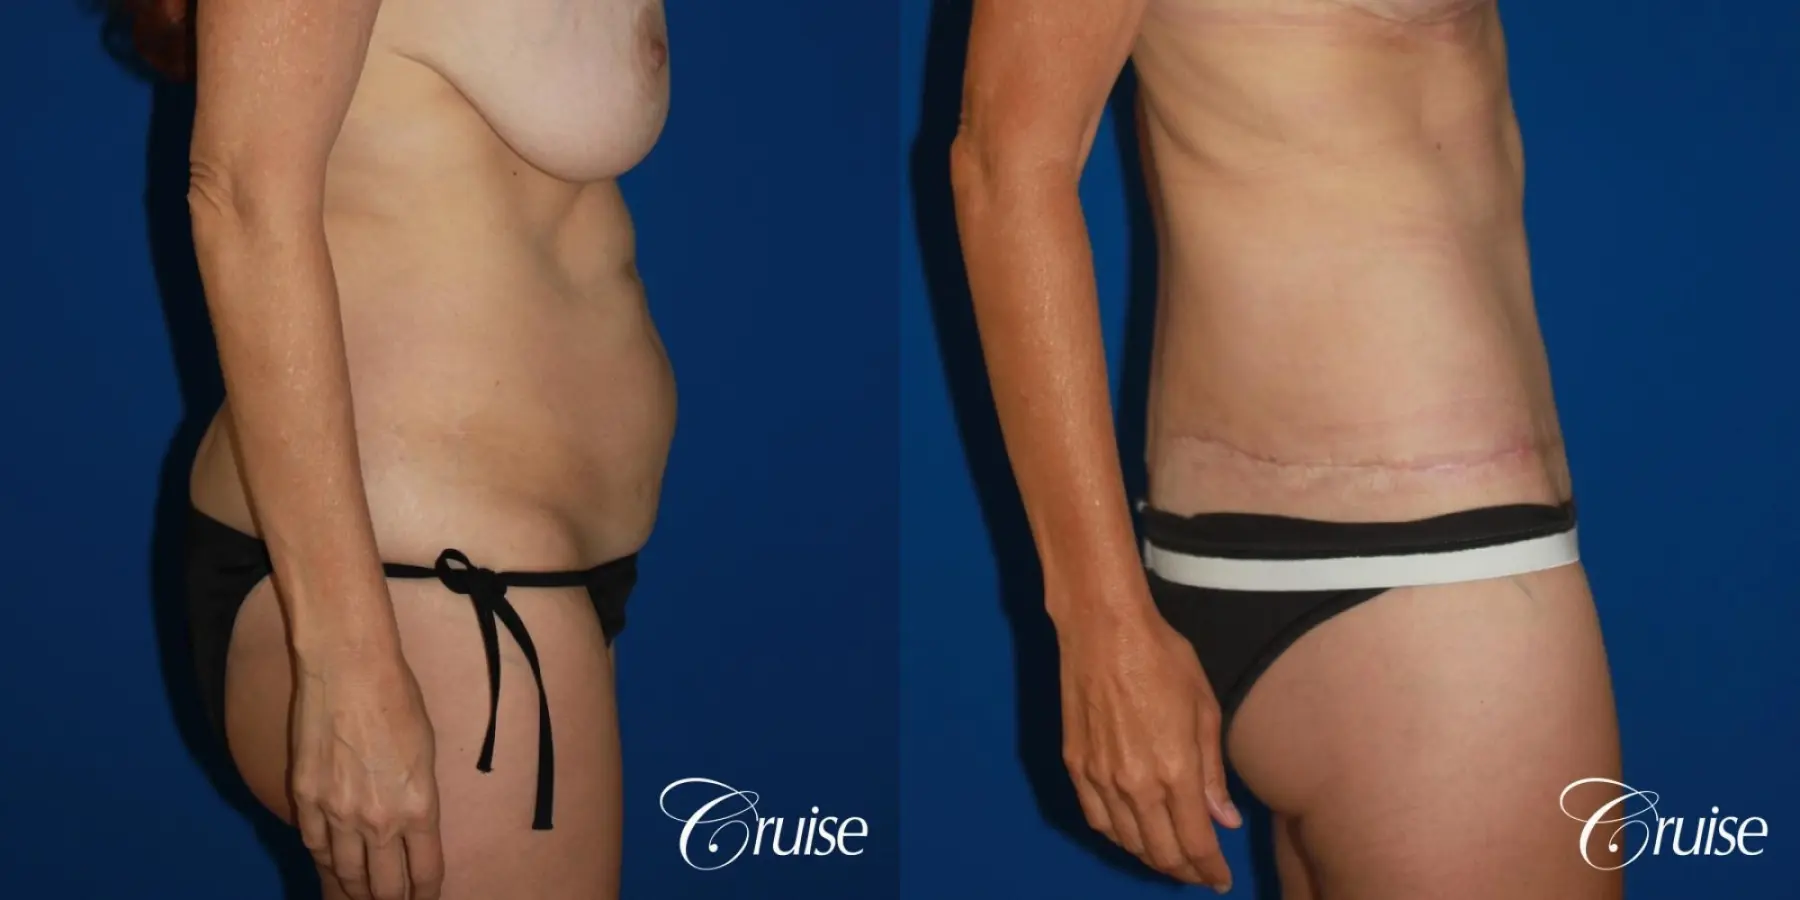 47 Yr Old Liposuction & Circumferential Incision Tummy Tuck - Before and After 4